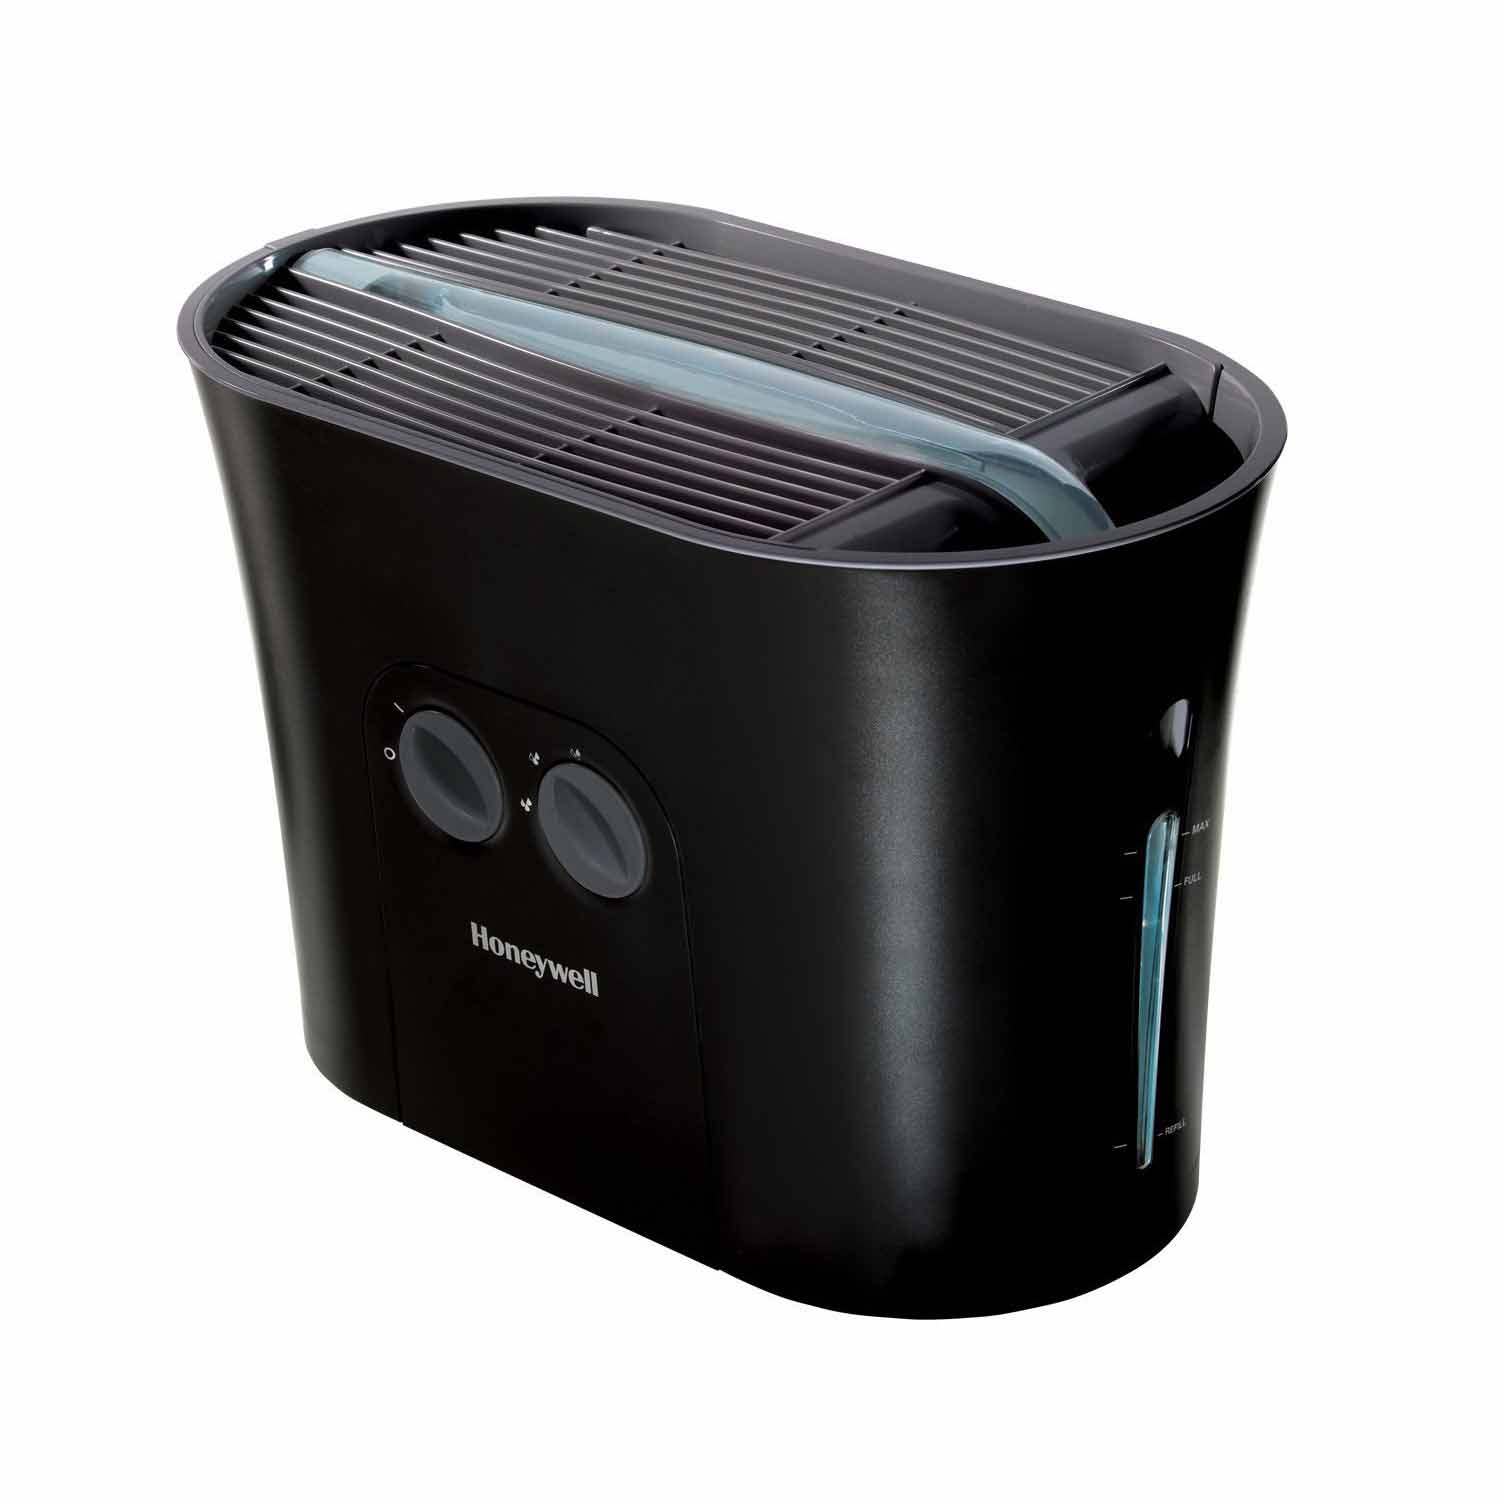 Honeywell Easy to Care Top Fill Humidifier Black, HCM-750B